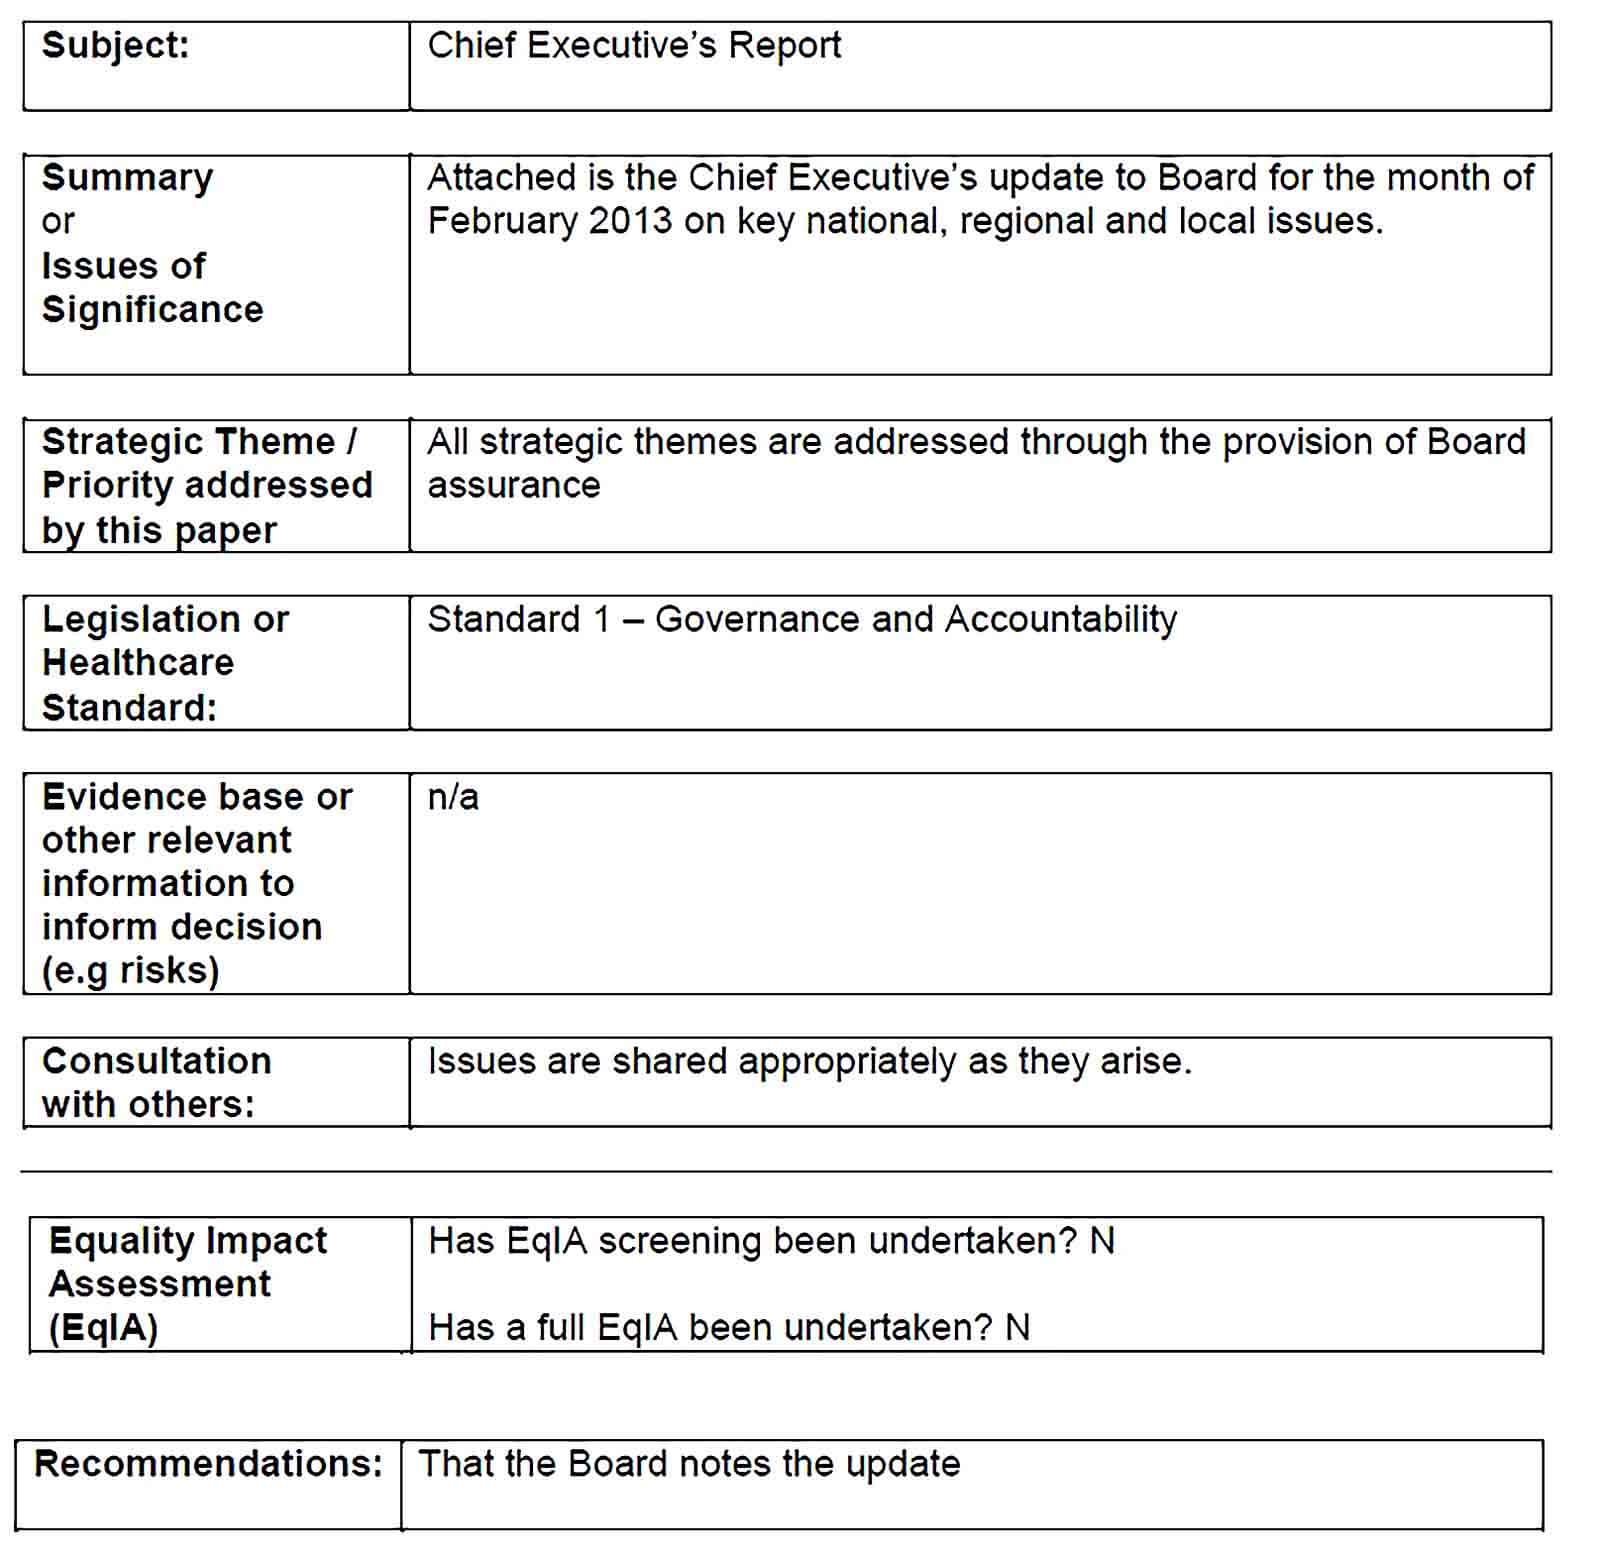 Sample chief executive report template